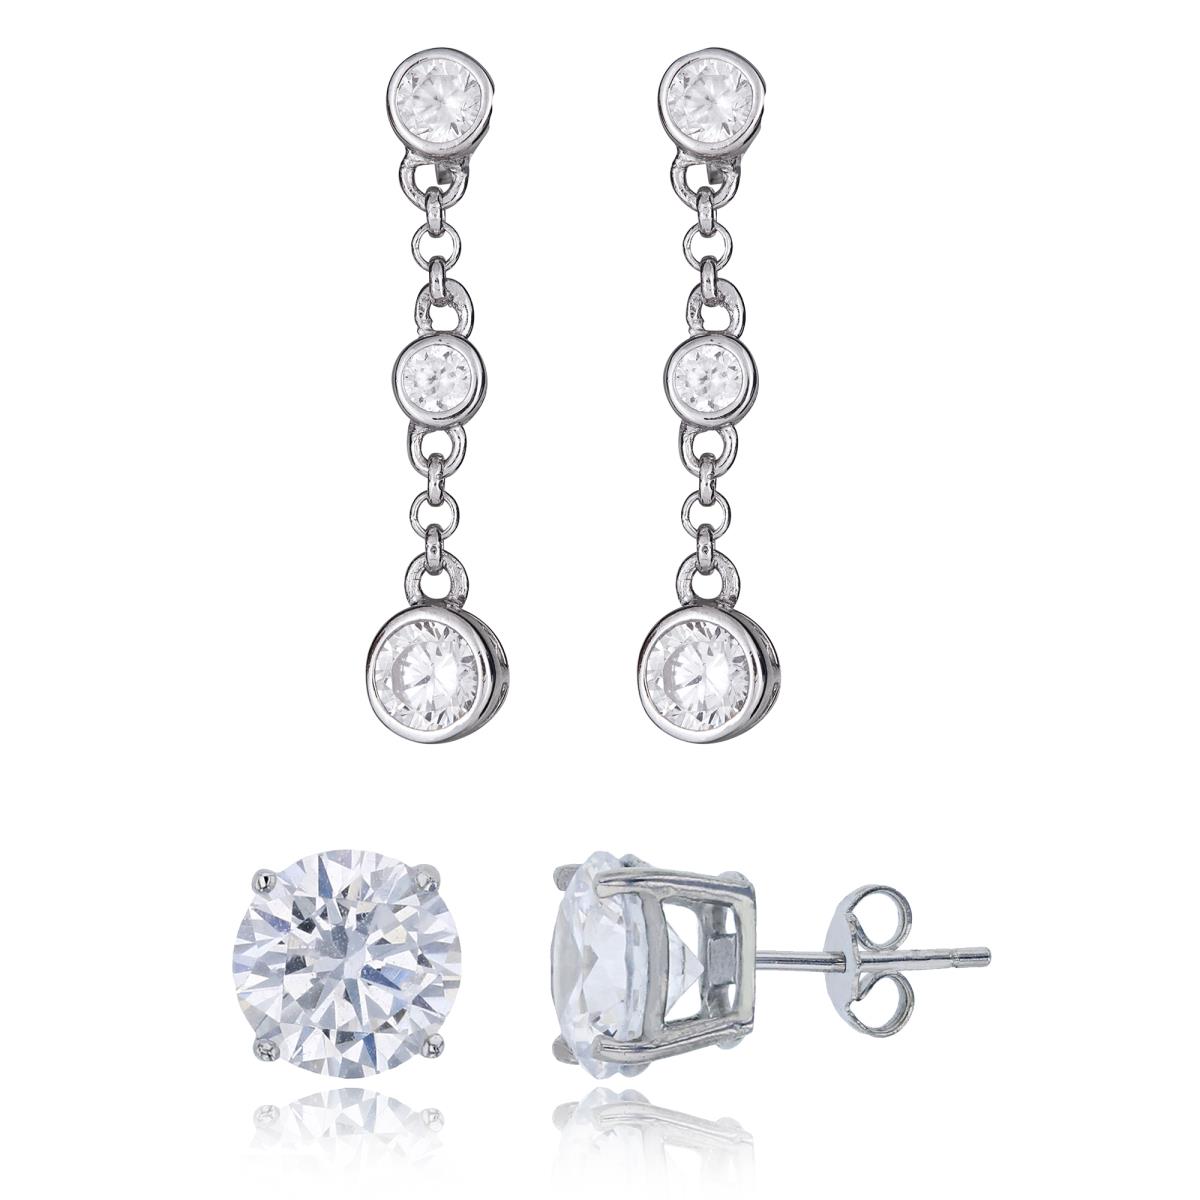 Sterling Silver Rhodium 5.5x27mm Bezel Dangling & 8mm Round Solitaire Stud Earring Set